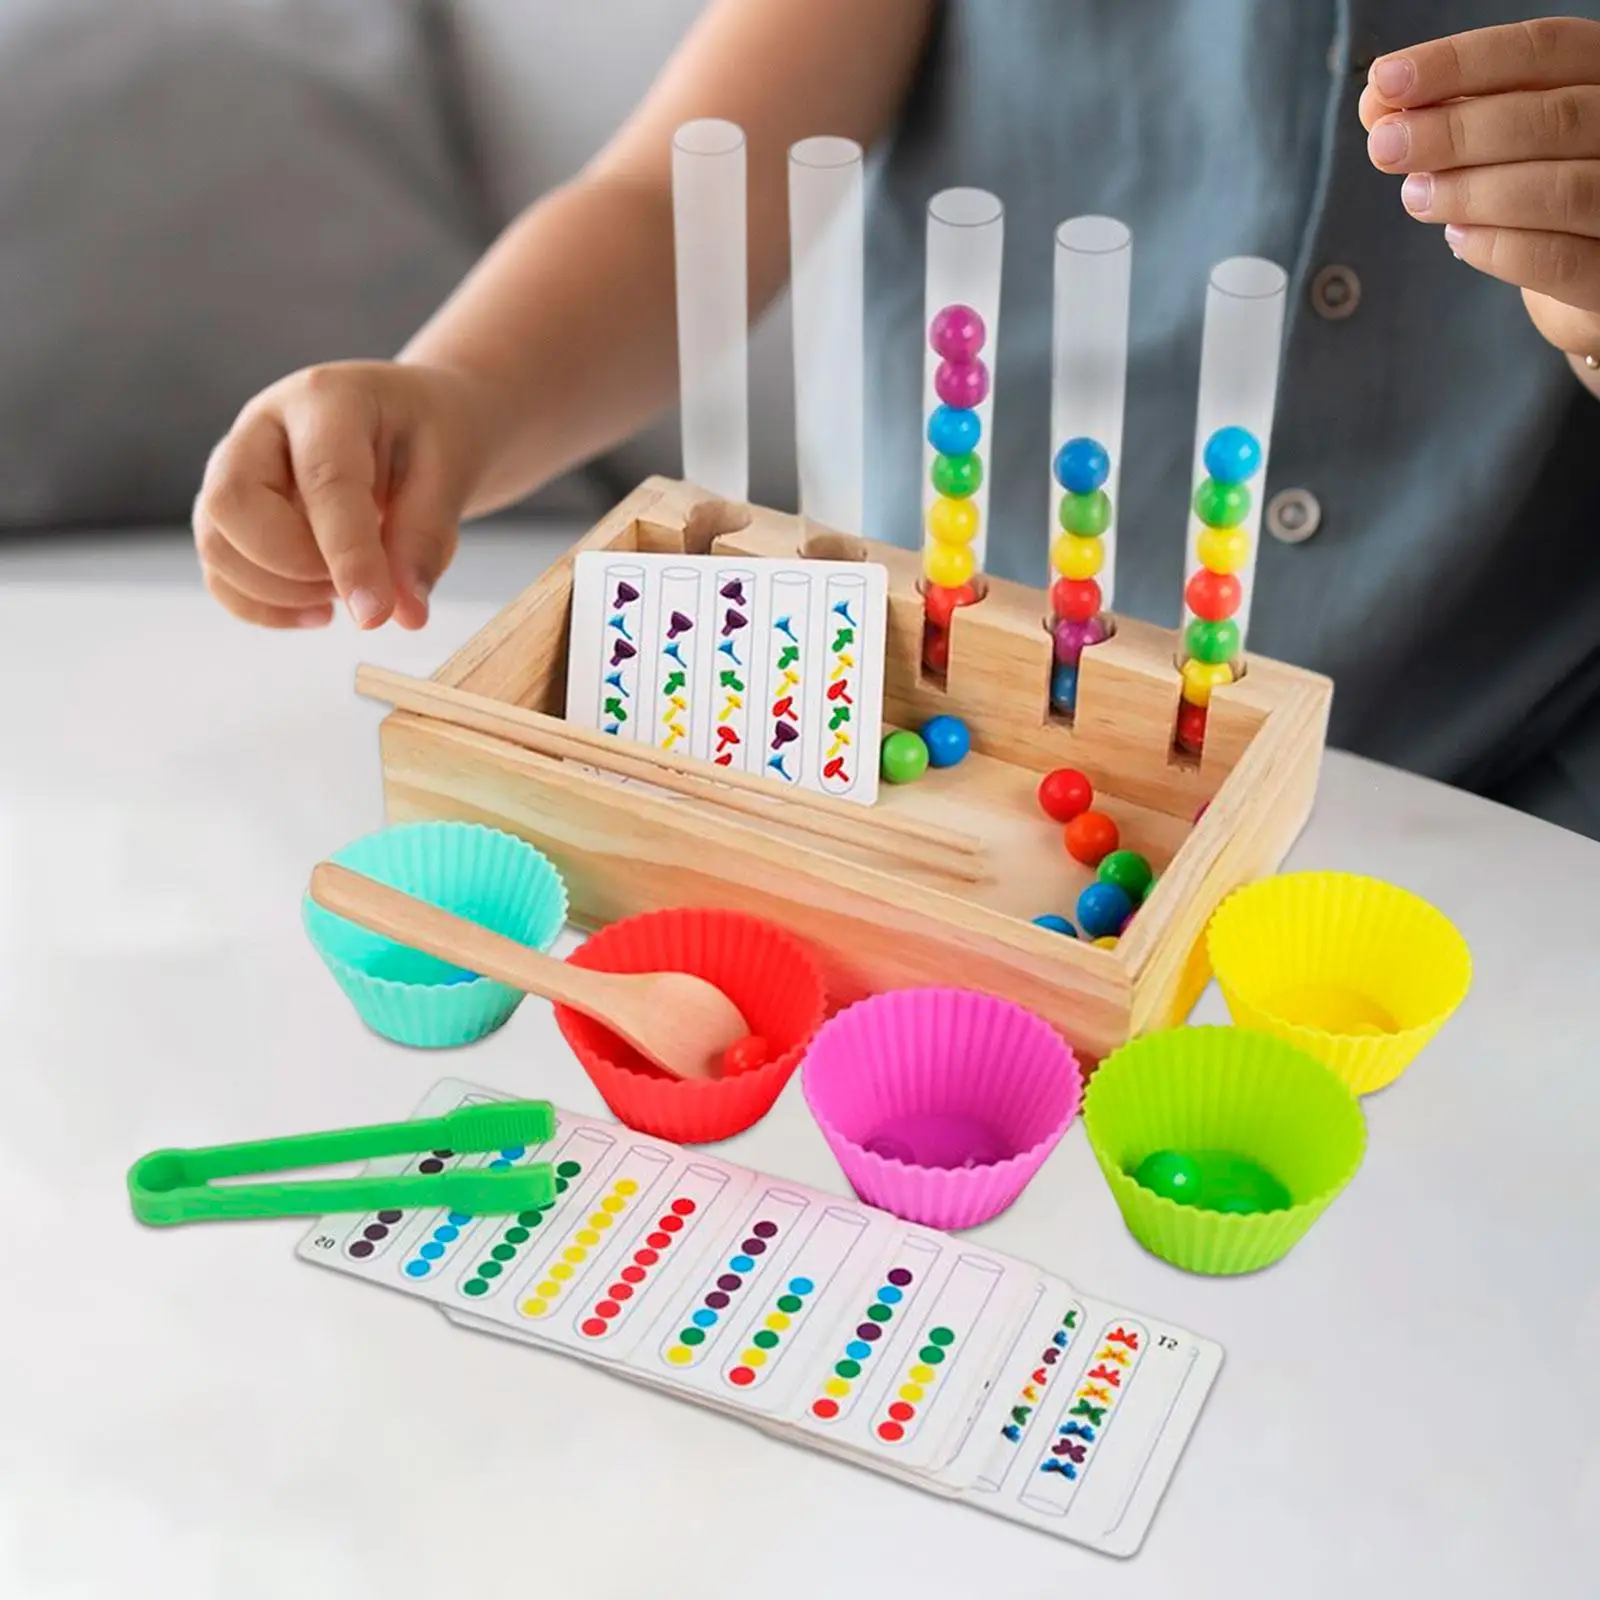 Rainbow Clip Bead Puzzle and Bowl Spoon Preschool Learning Toy Wooden Peg Board Game for Girls and Boys Toddler Kids Children